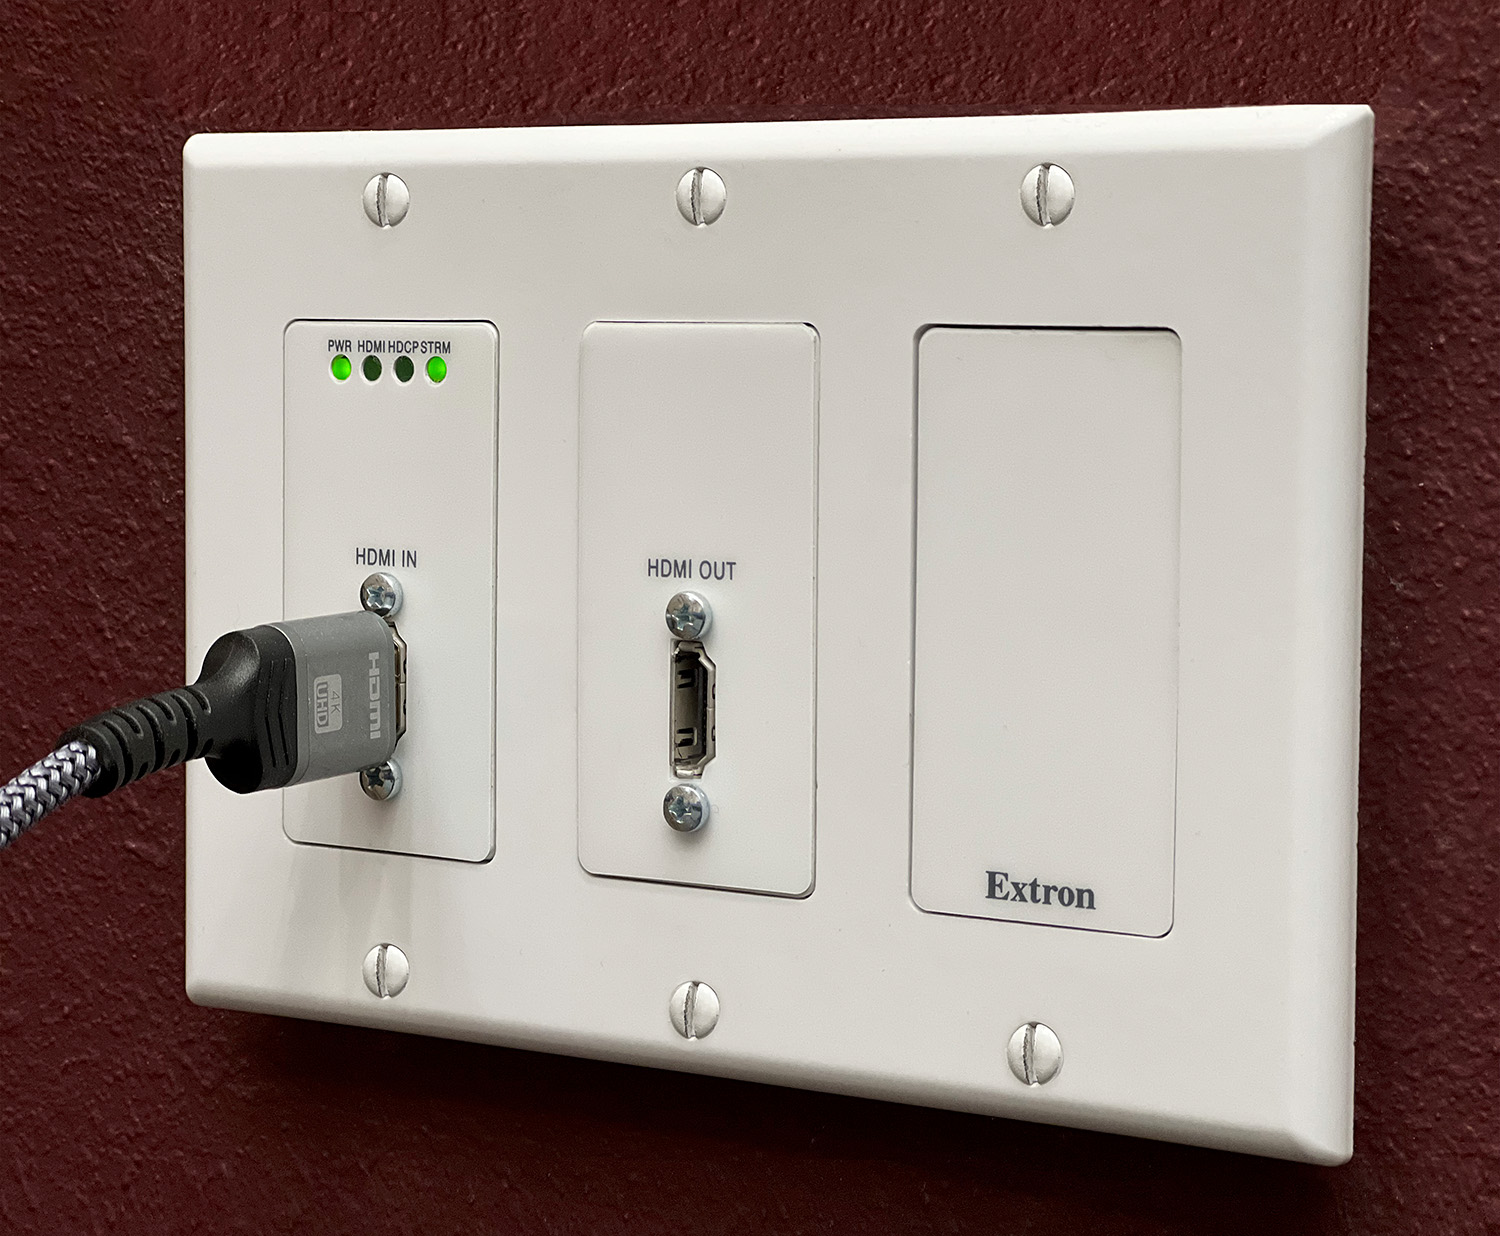 One of the ways teachers can originate AV lesson content is by plugging in their BYOD device at the NAV encoder HDMI wallplate located in each classroom.